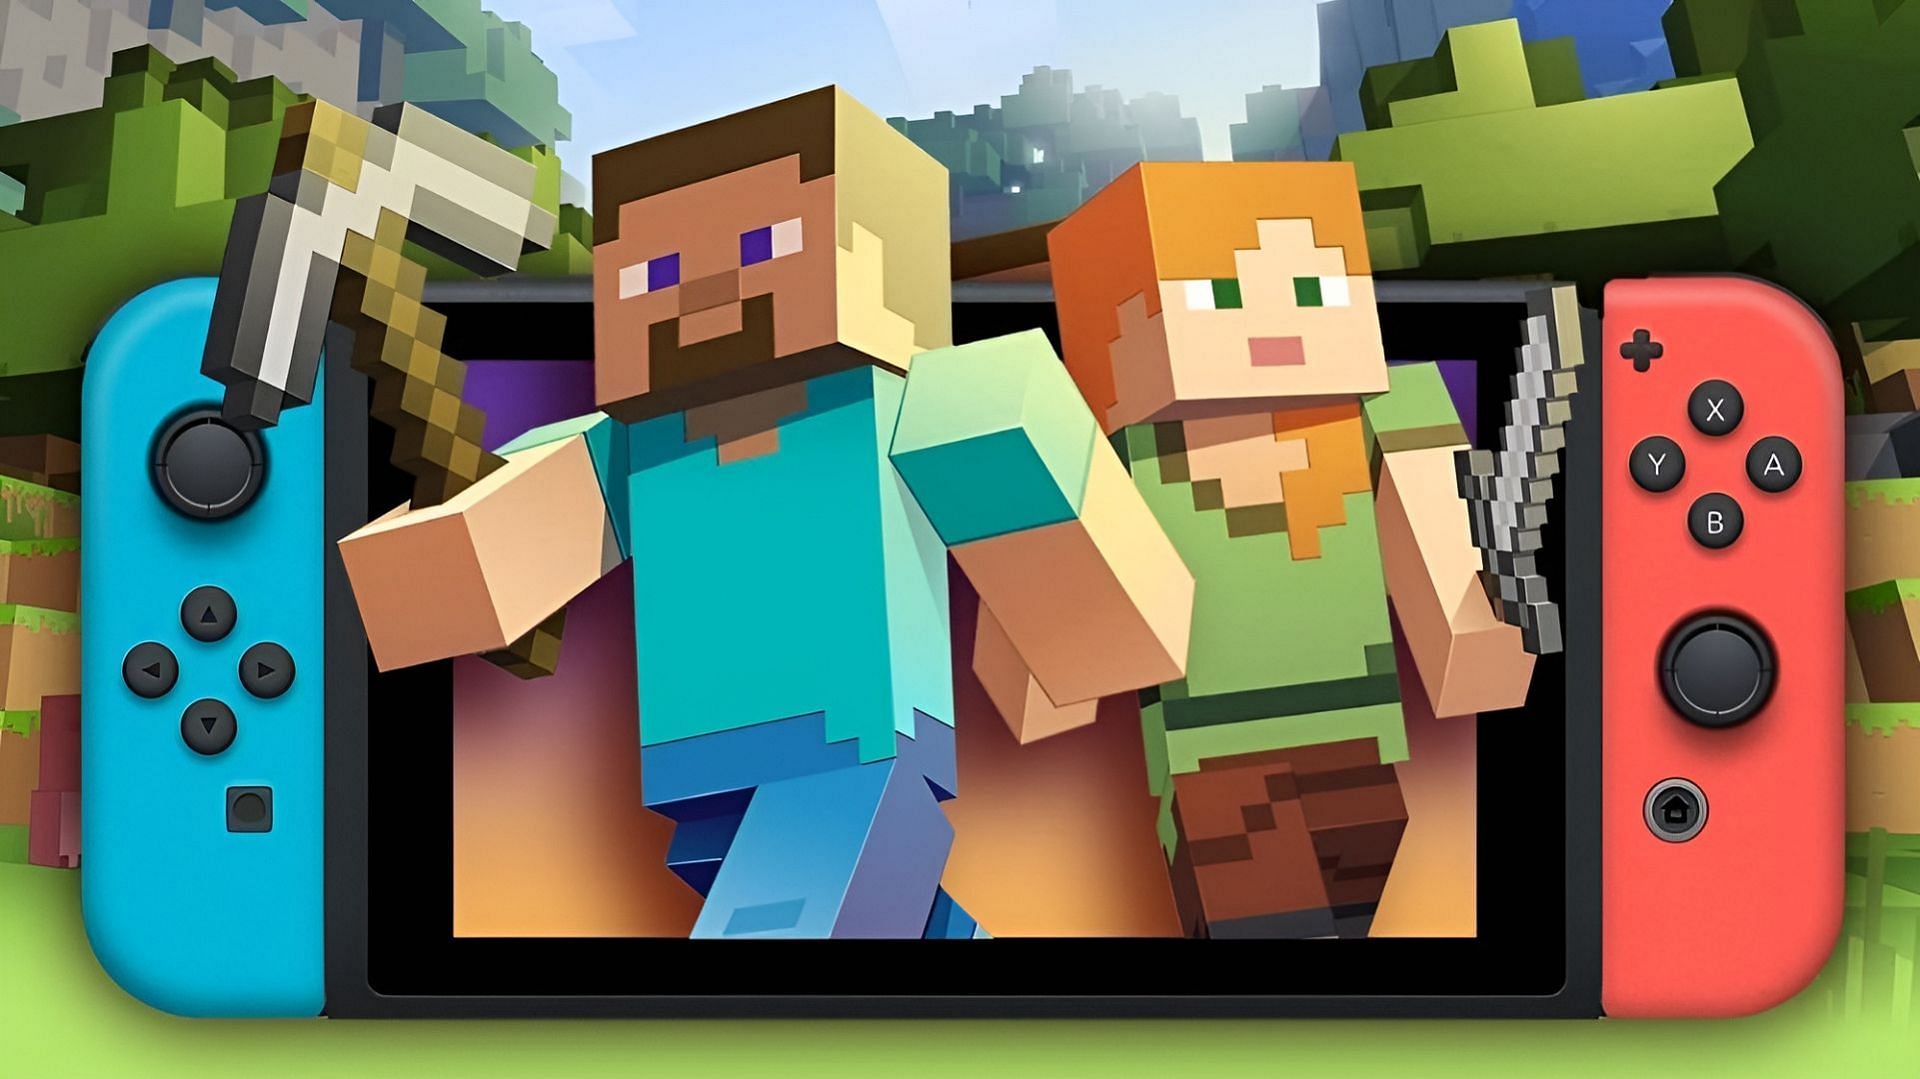 Minecraft Bedrock on Nintendo Switch is marred with performance and bug issues. (Image via Mojang/Nintendo)